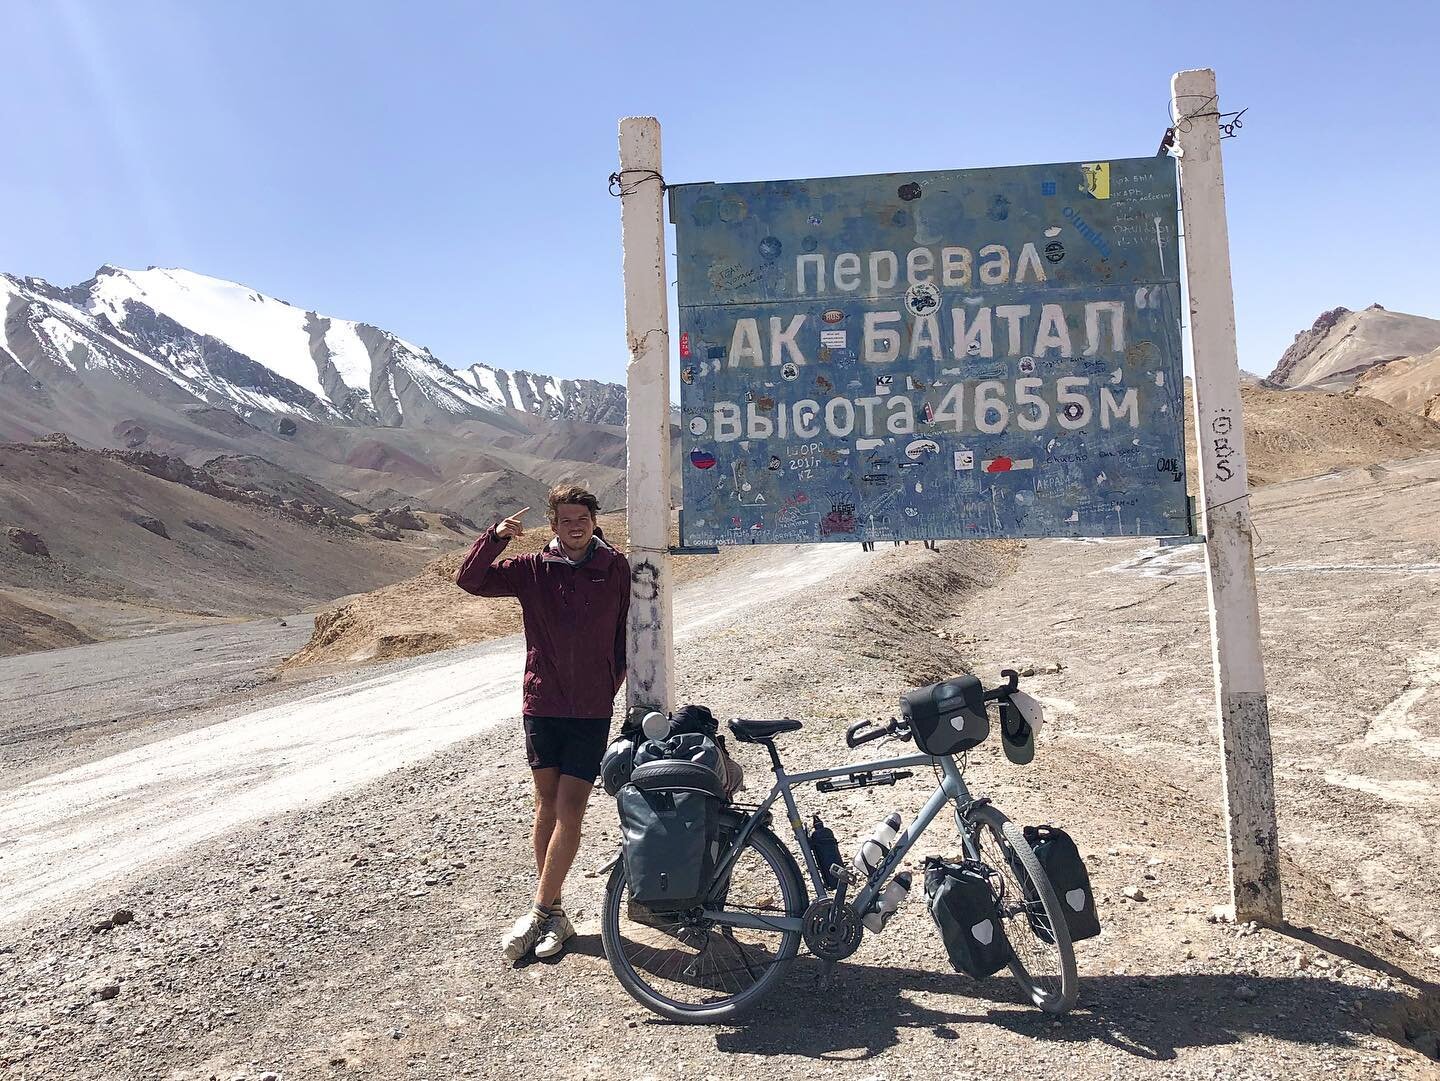 Ak-Baital Pass - 4655m🏔

Reaching the top of the Ak-Baital Pass was definitely one of the highlights of the trip (literally!). This one was pretty tough, climbing the unpaved roads to the top, having less oxigen then we are used to because of the hi